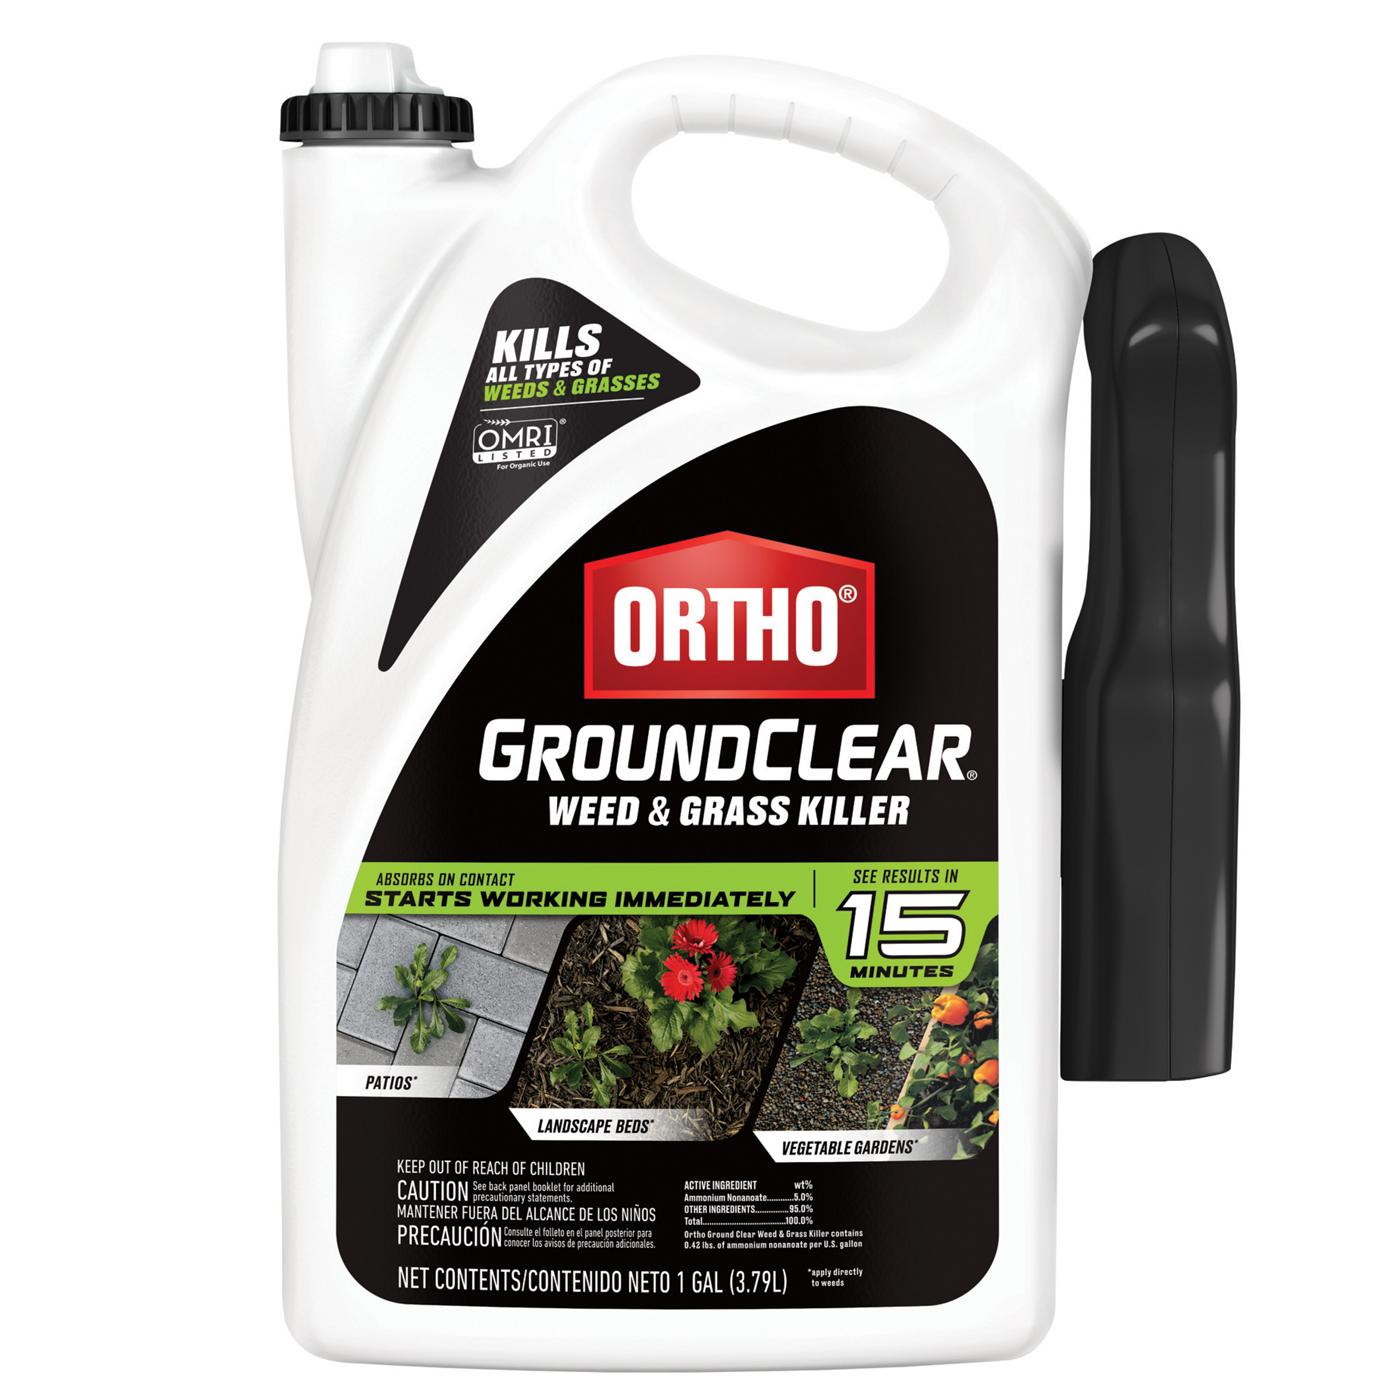 Ortho GroundClear Weed & Grass Killer; image 1 of 2